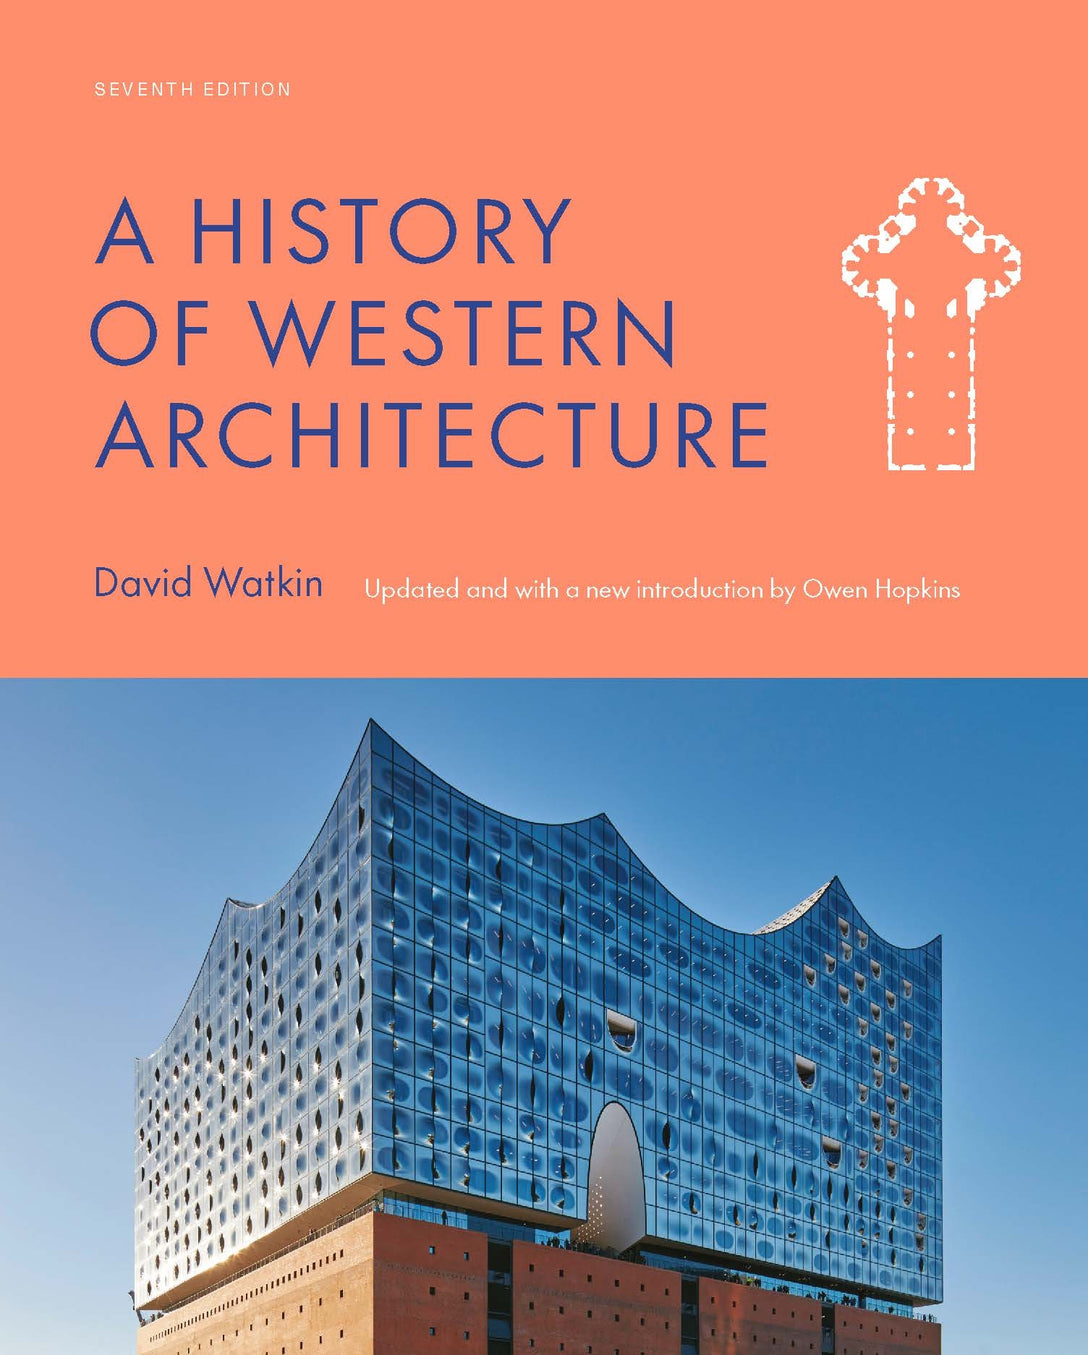 A History of Western Architecture Seventh Edition by Owen Hopkins, David Watkin